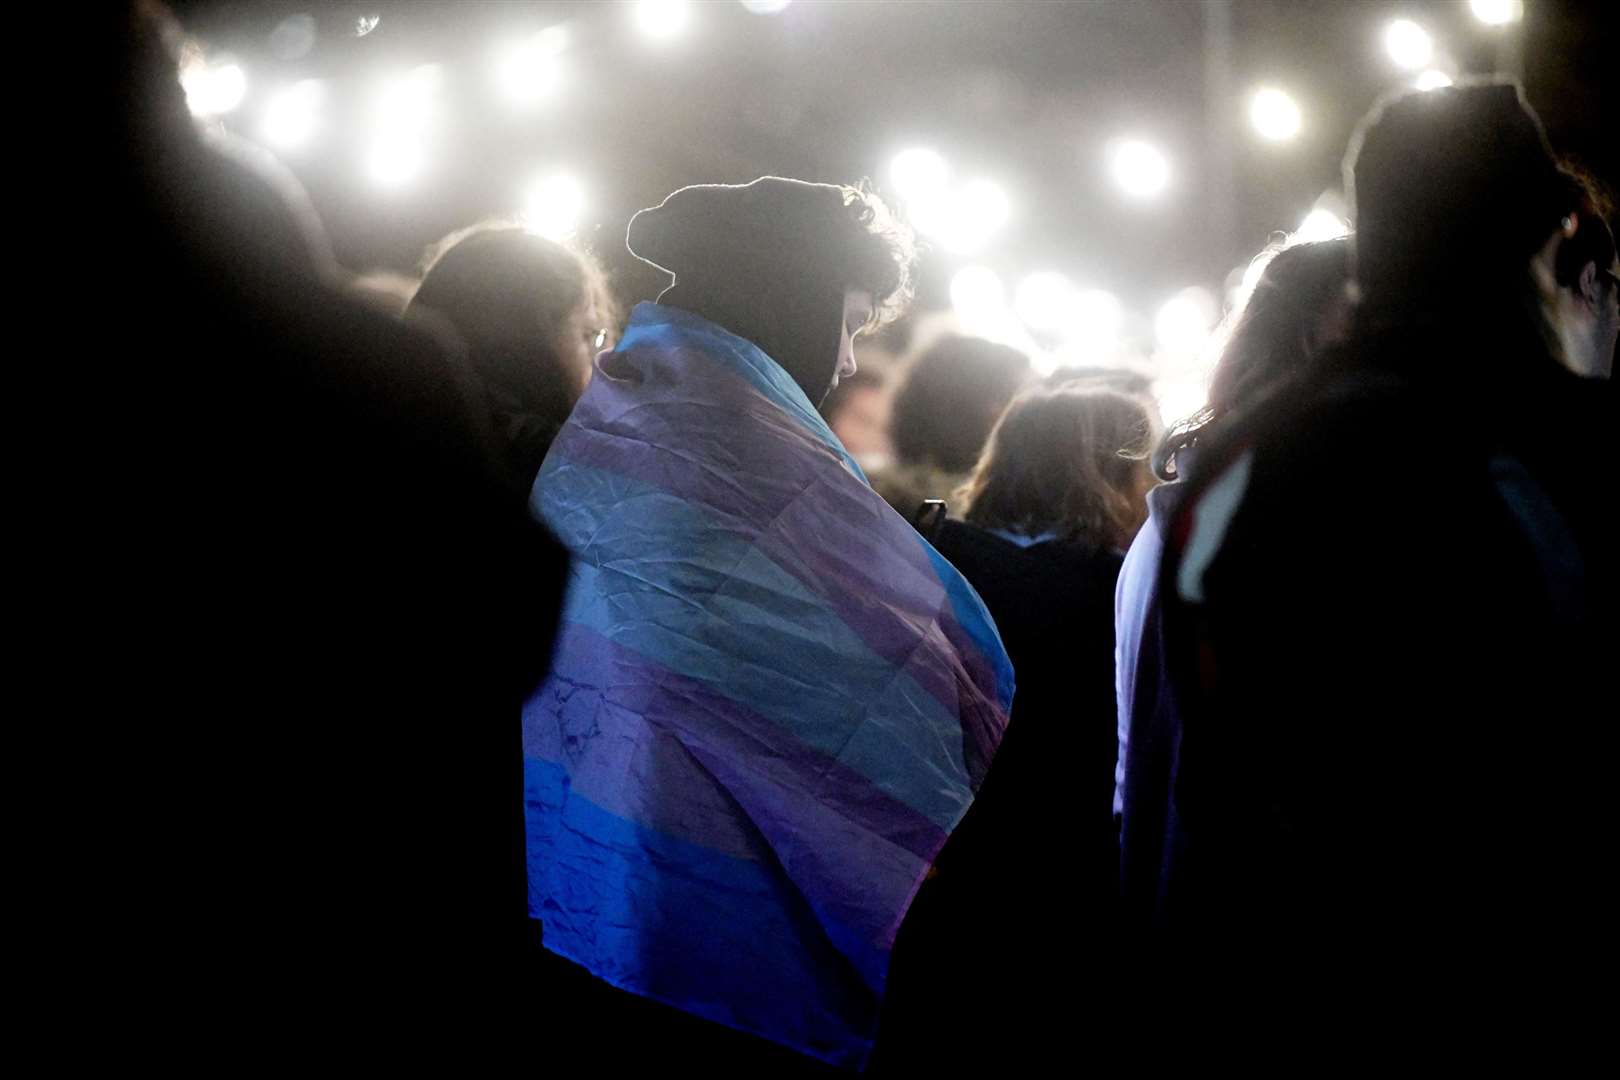 One attendee was draped in the transgender flag. Picture: James Mackenzie